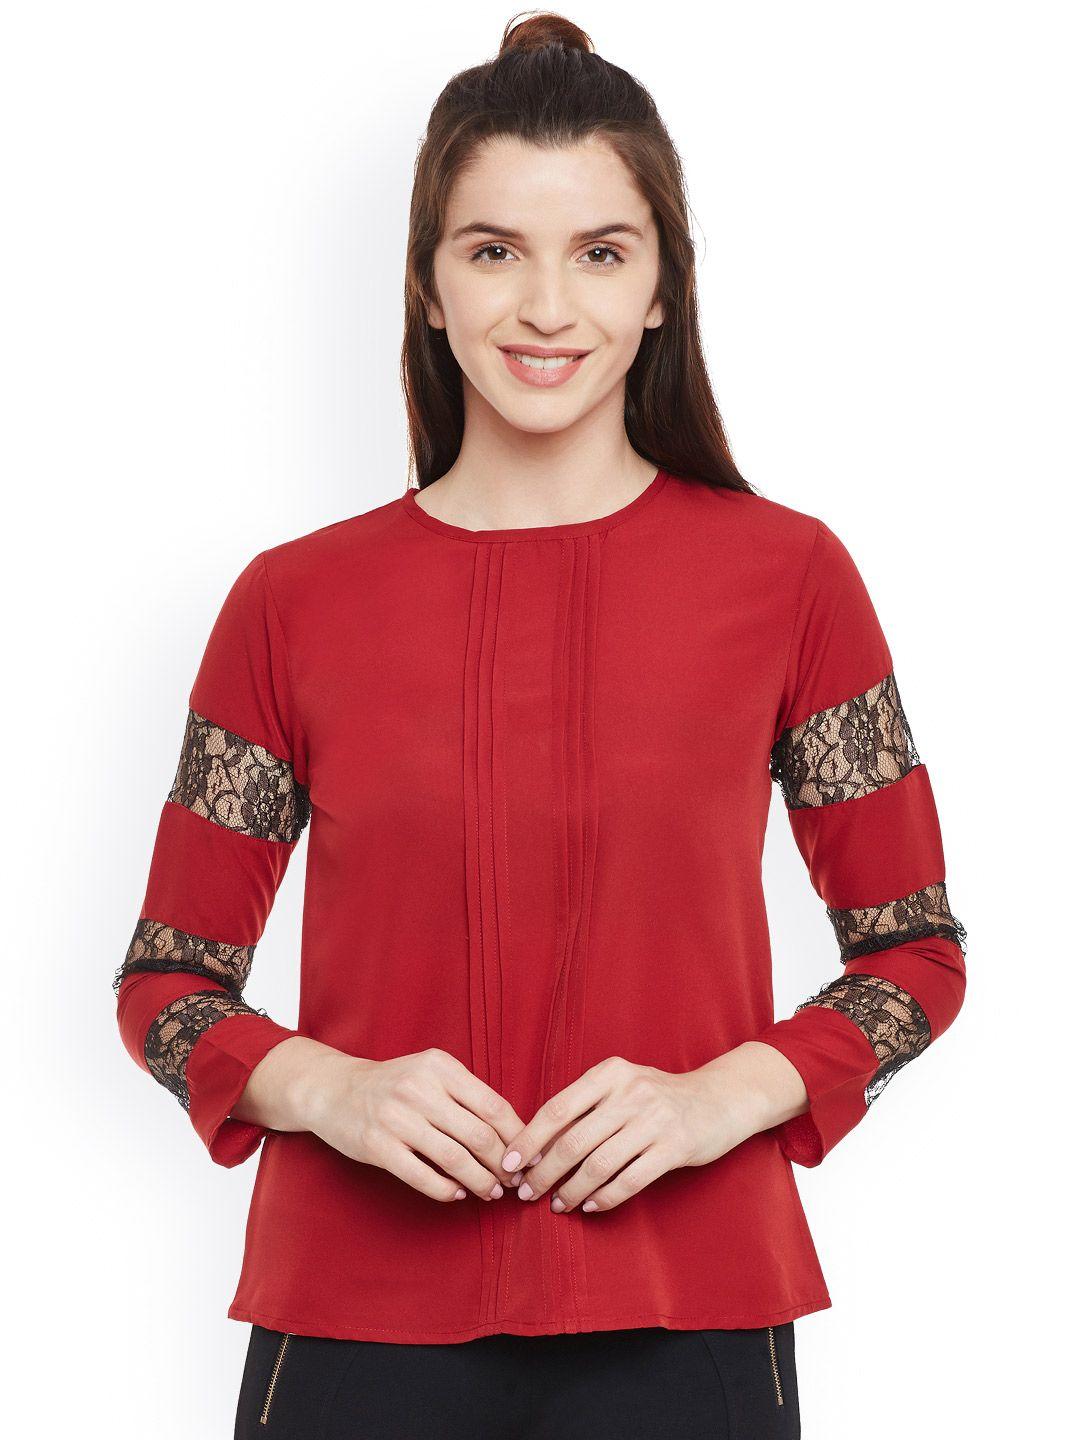 belle-fille-women-red-solid-top